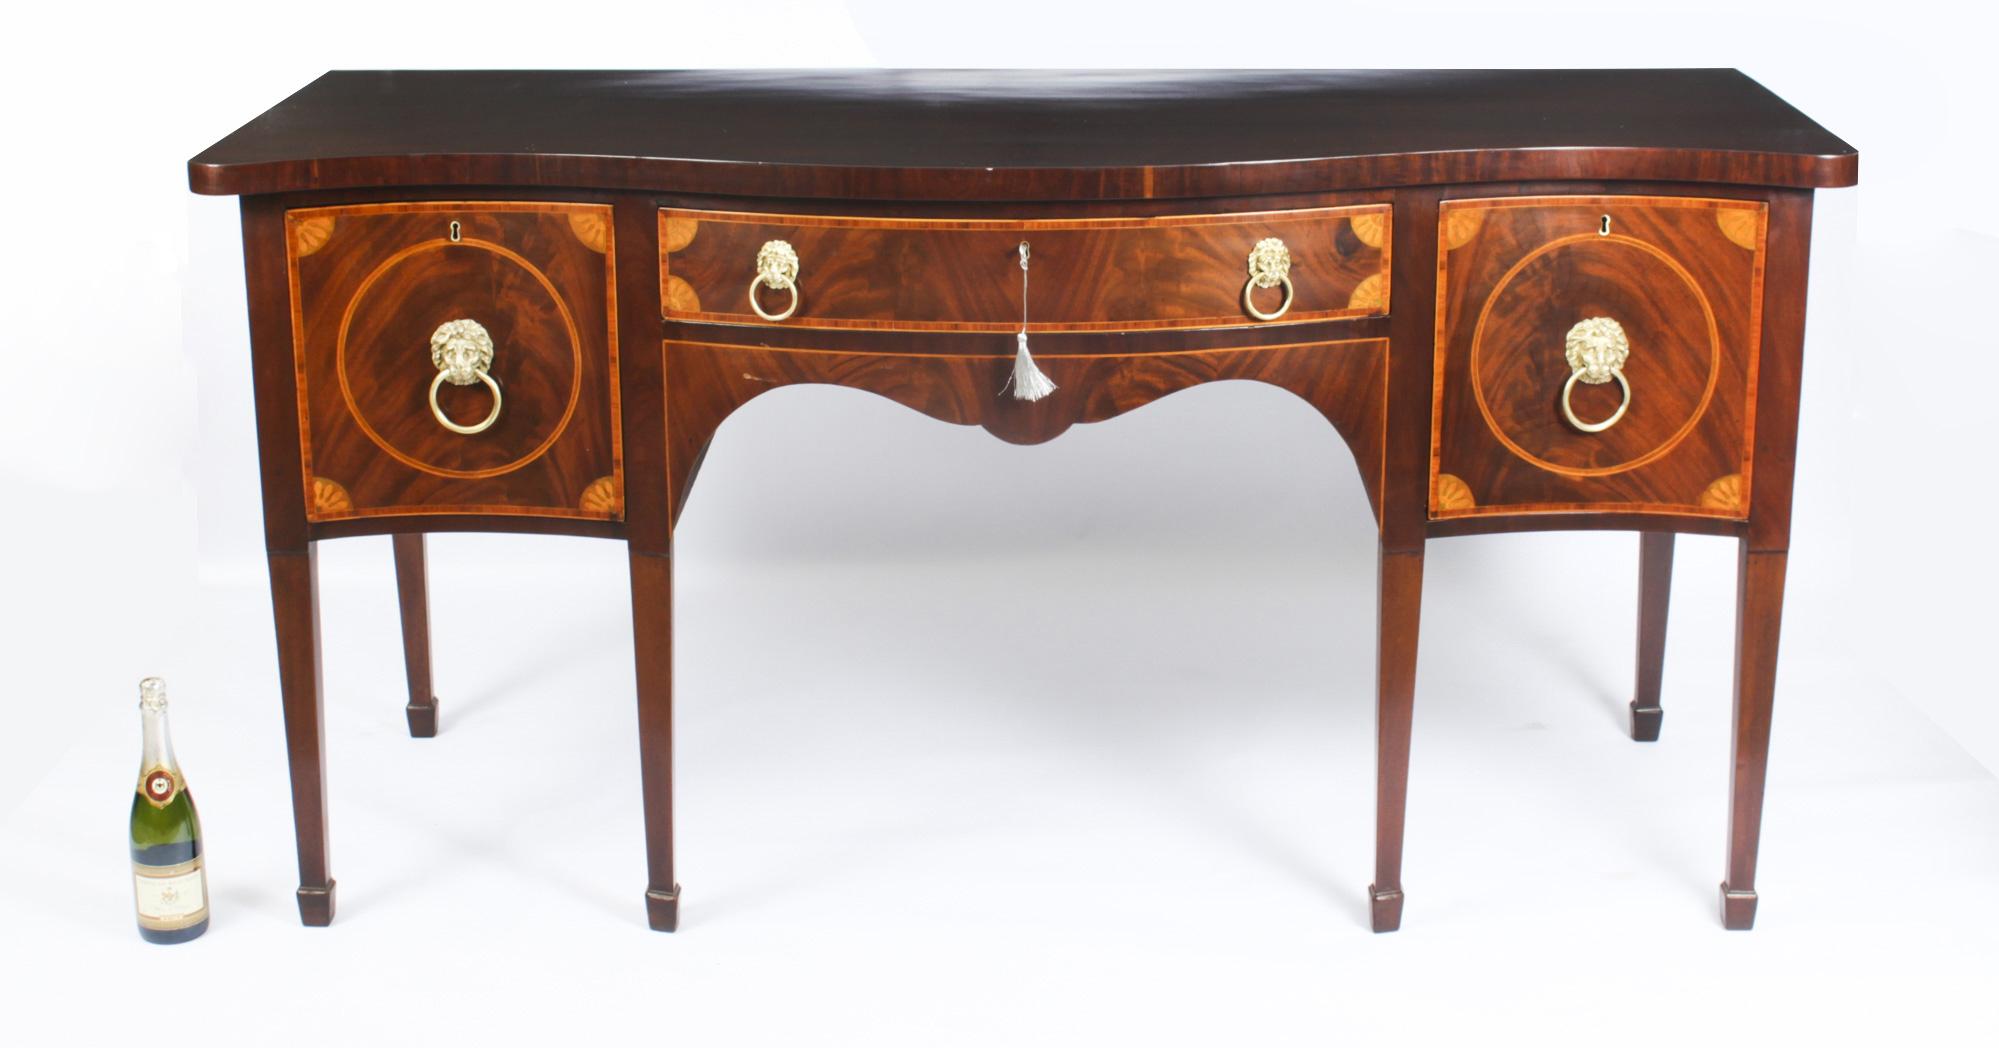 Antique George III Flame Mahogany Serpentine Sideboard, 18th Century For Sale 13